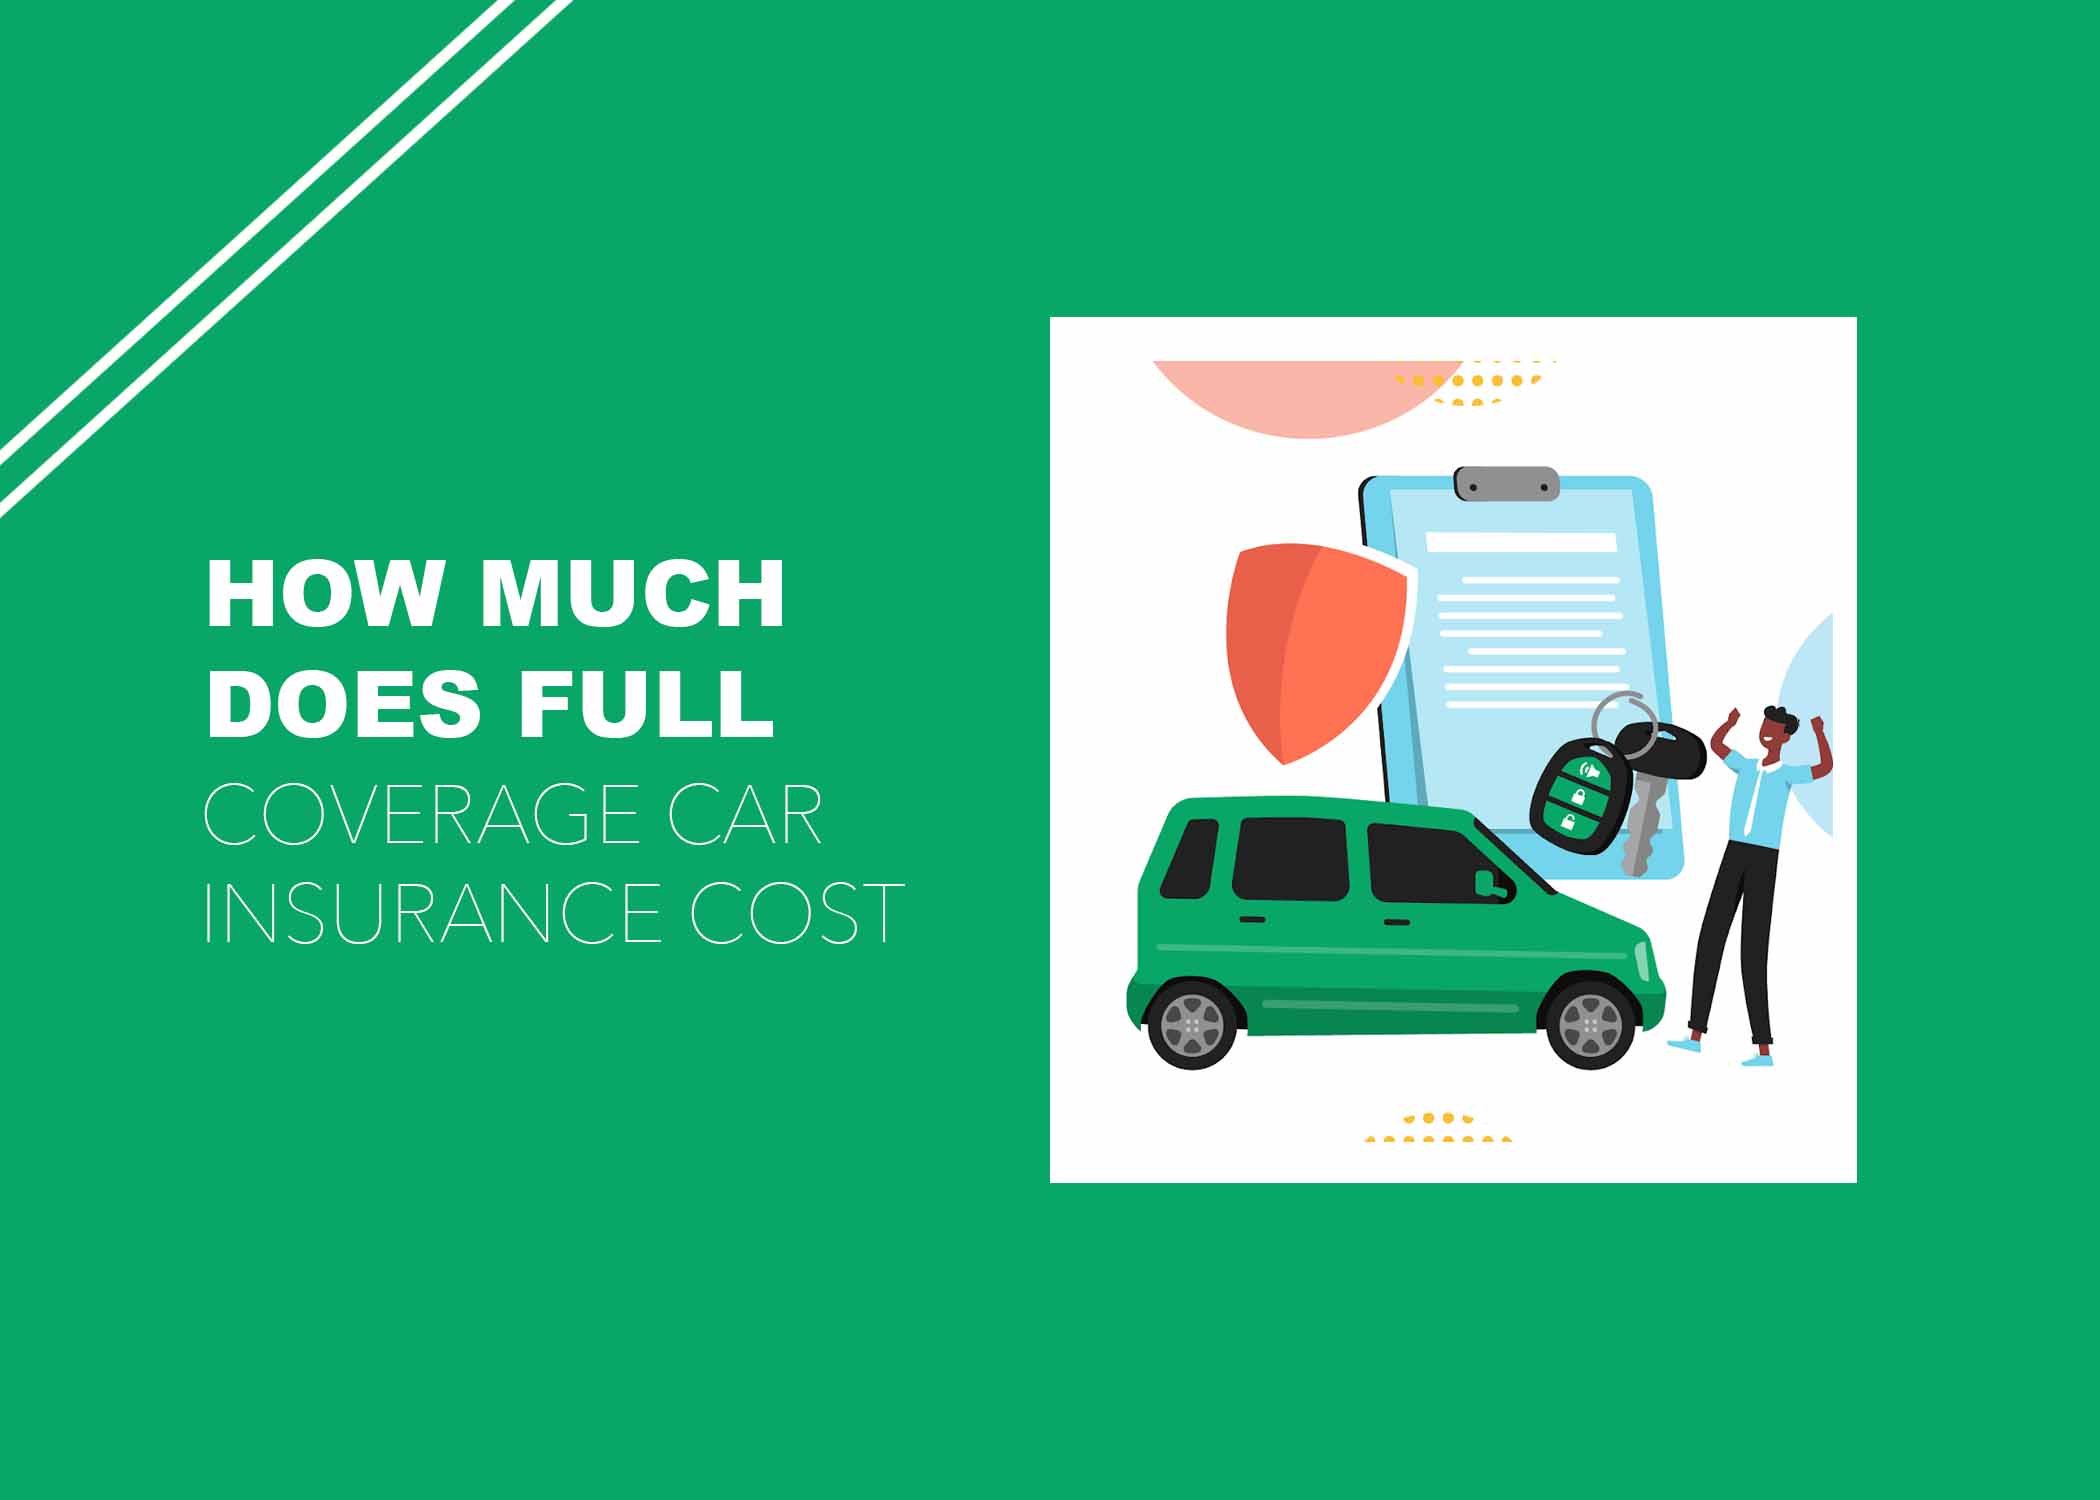 How Much Does Full Coverage Car Insurance Cost?